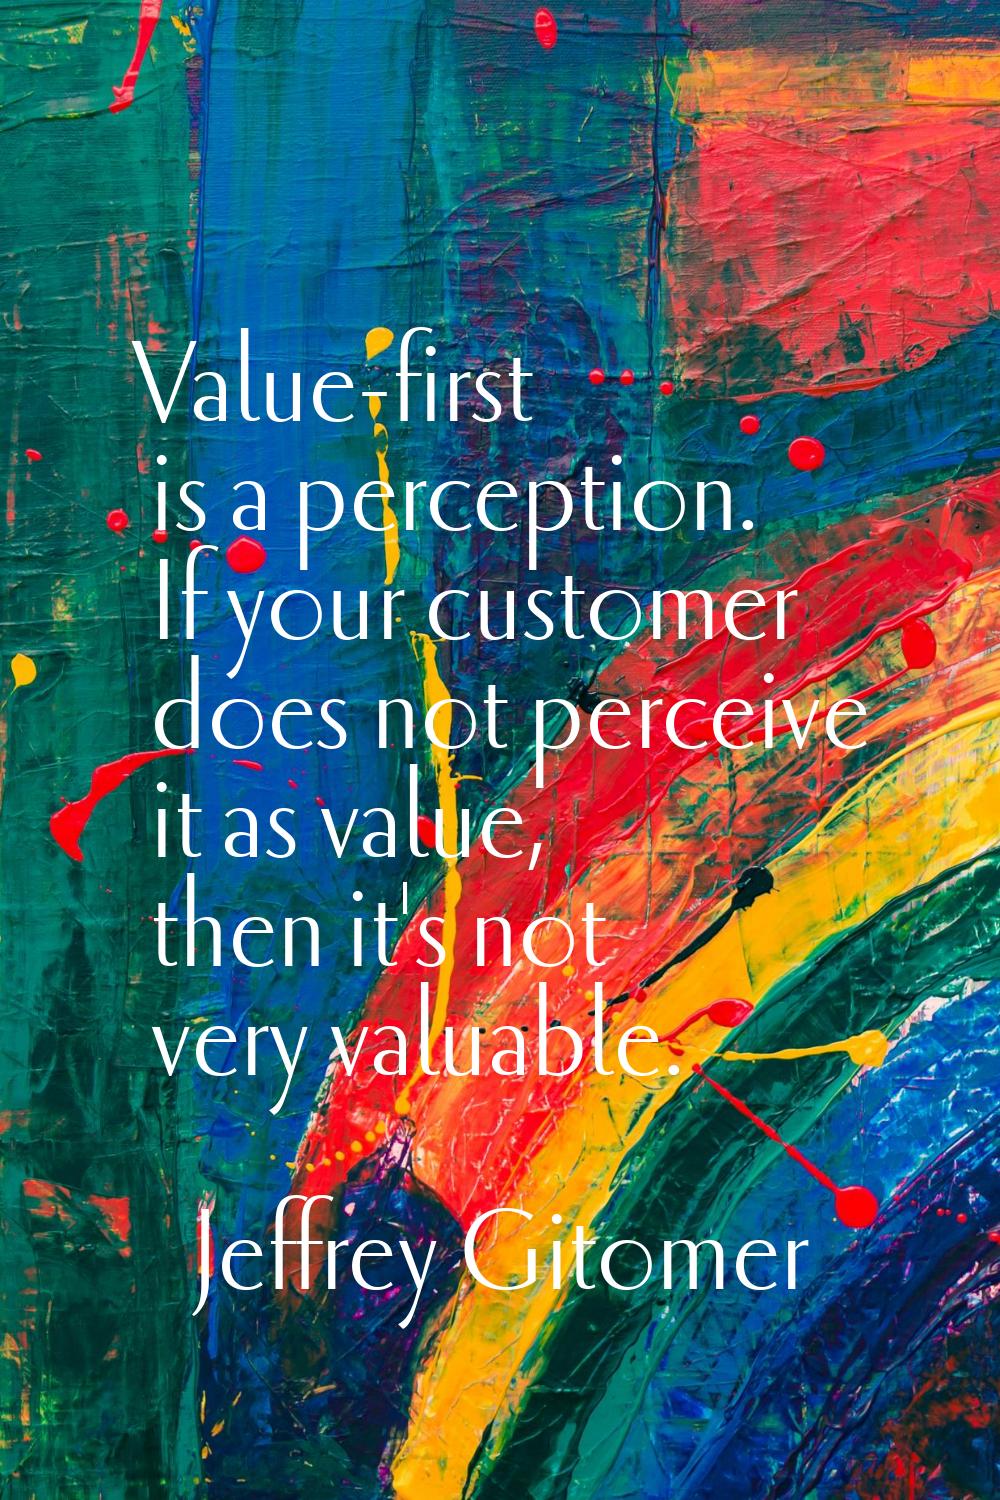 Value-first is a perception. If your customer does not perceive it as value, then it's not very val